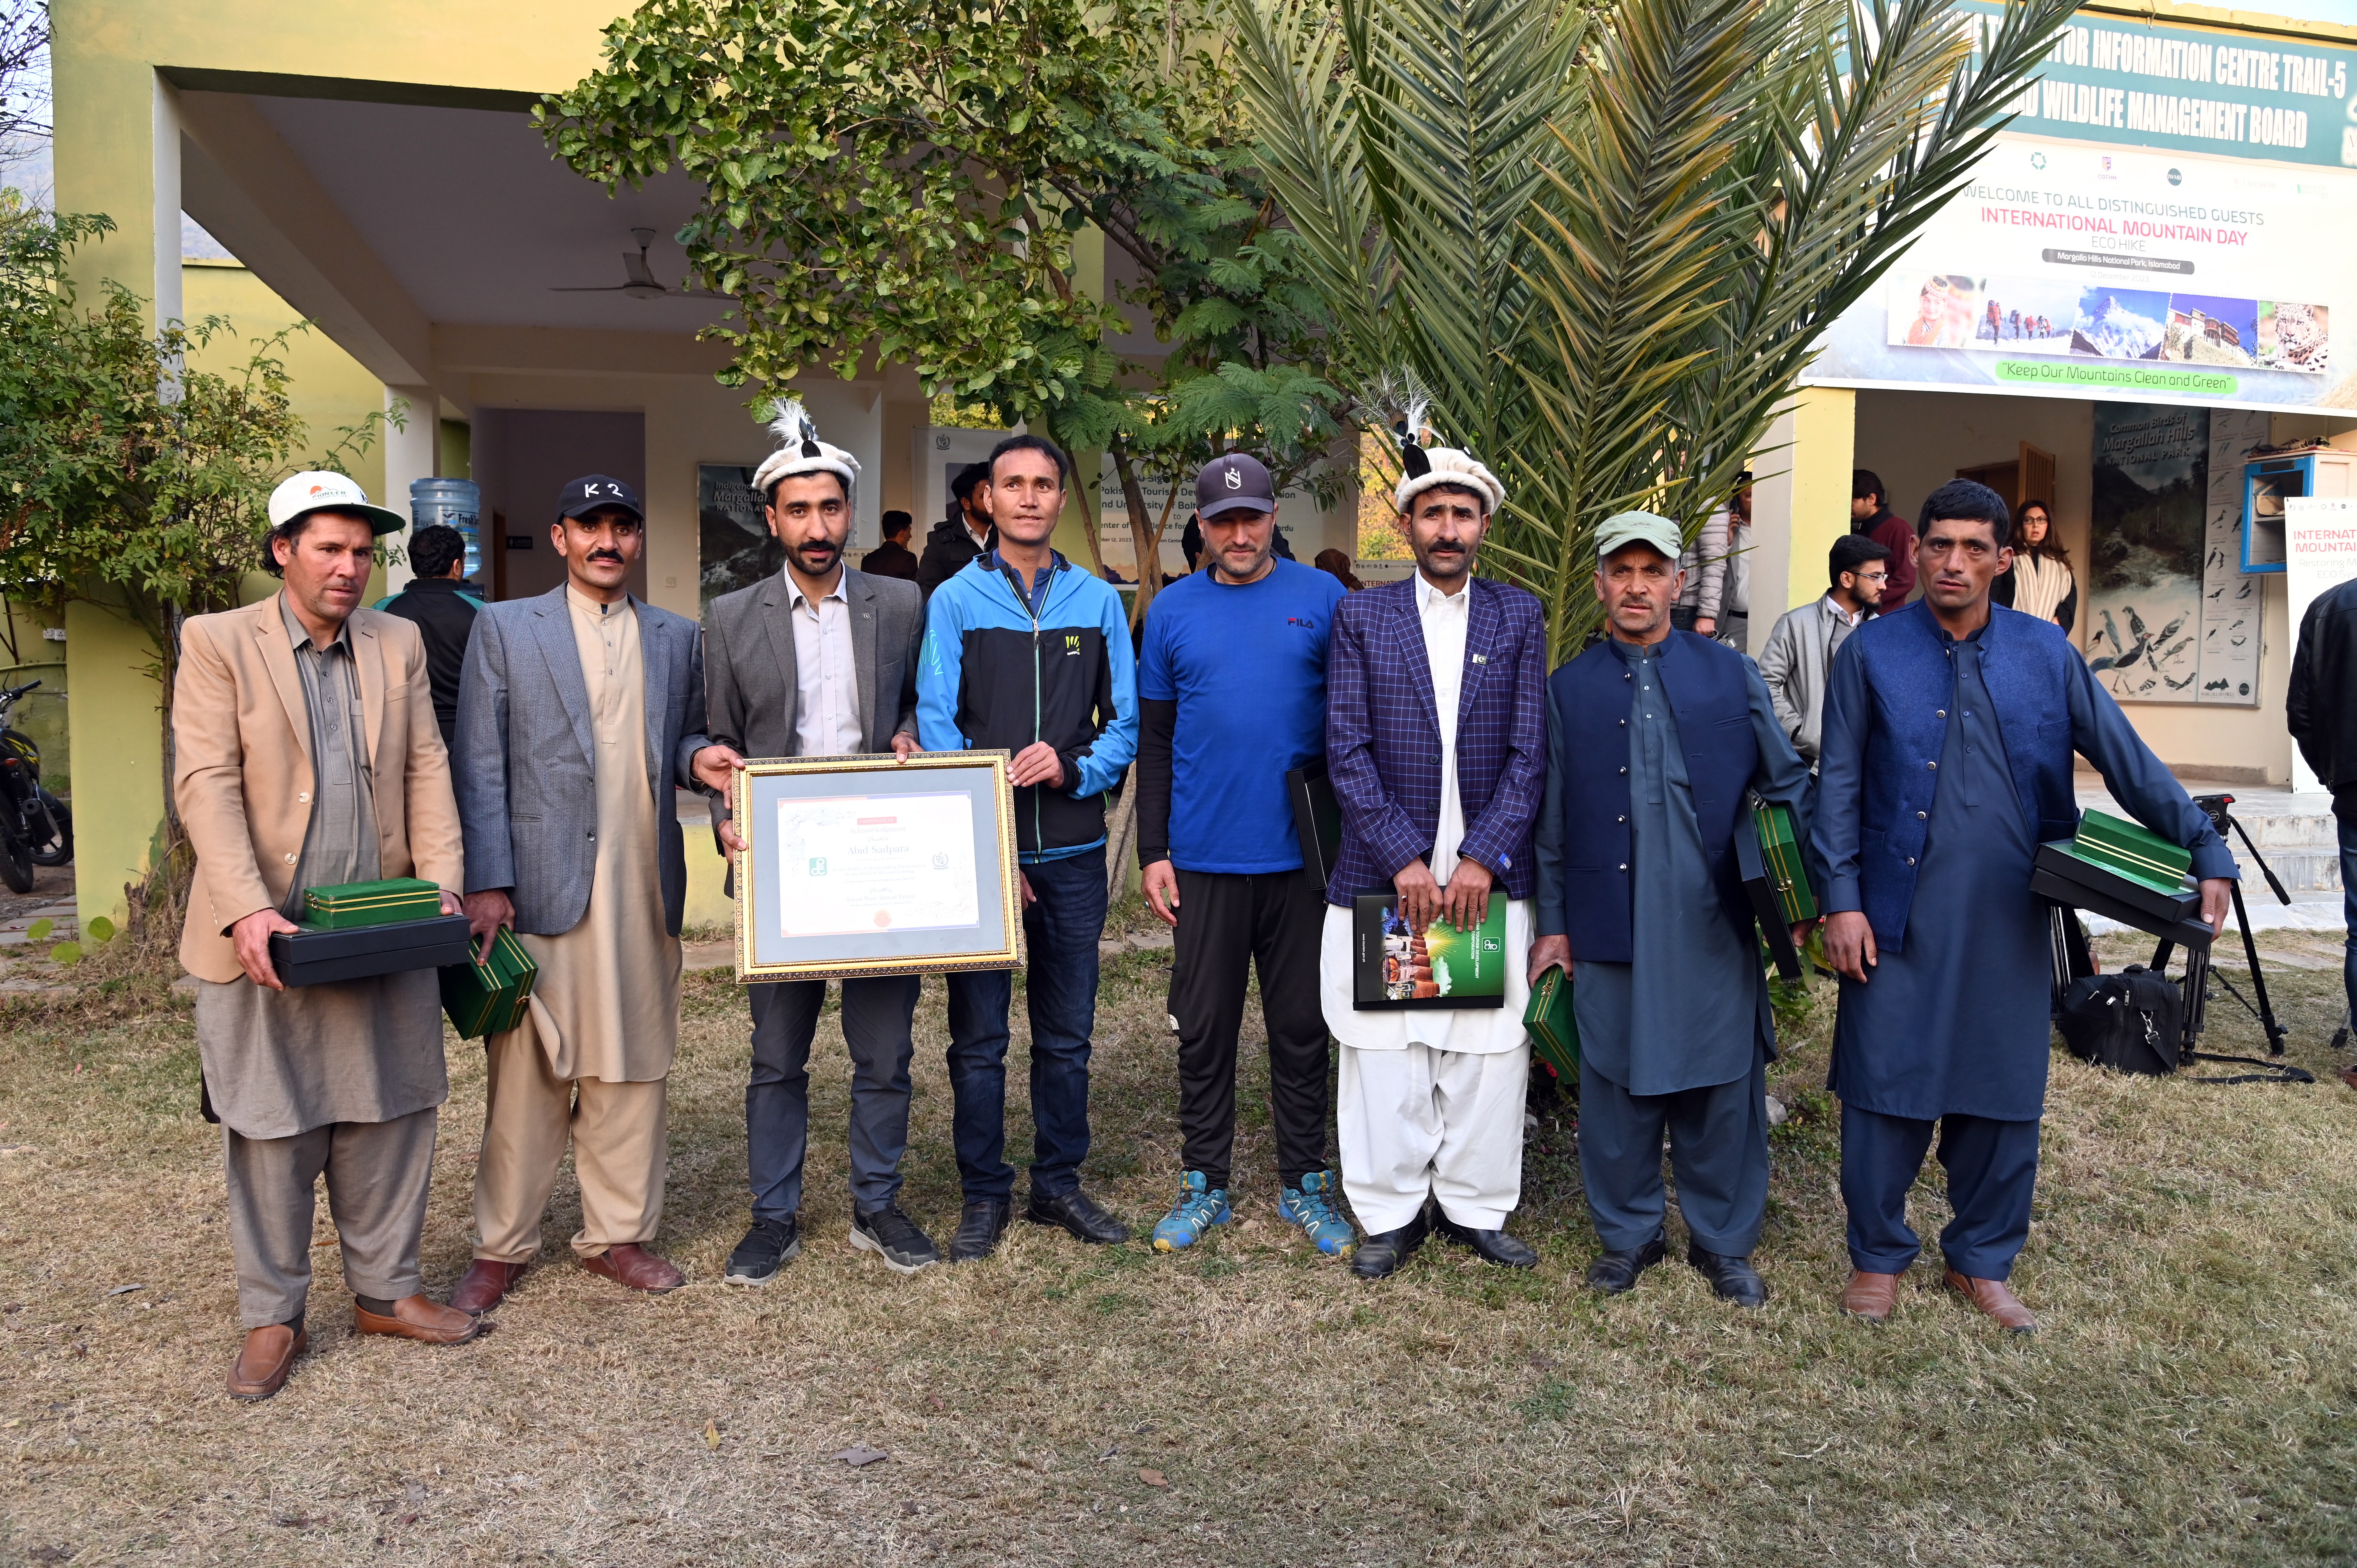 The group photo of the speakers and the participants at the award distribution ceremony on  International Mountain Day at Trail-7